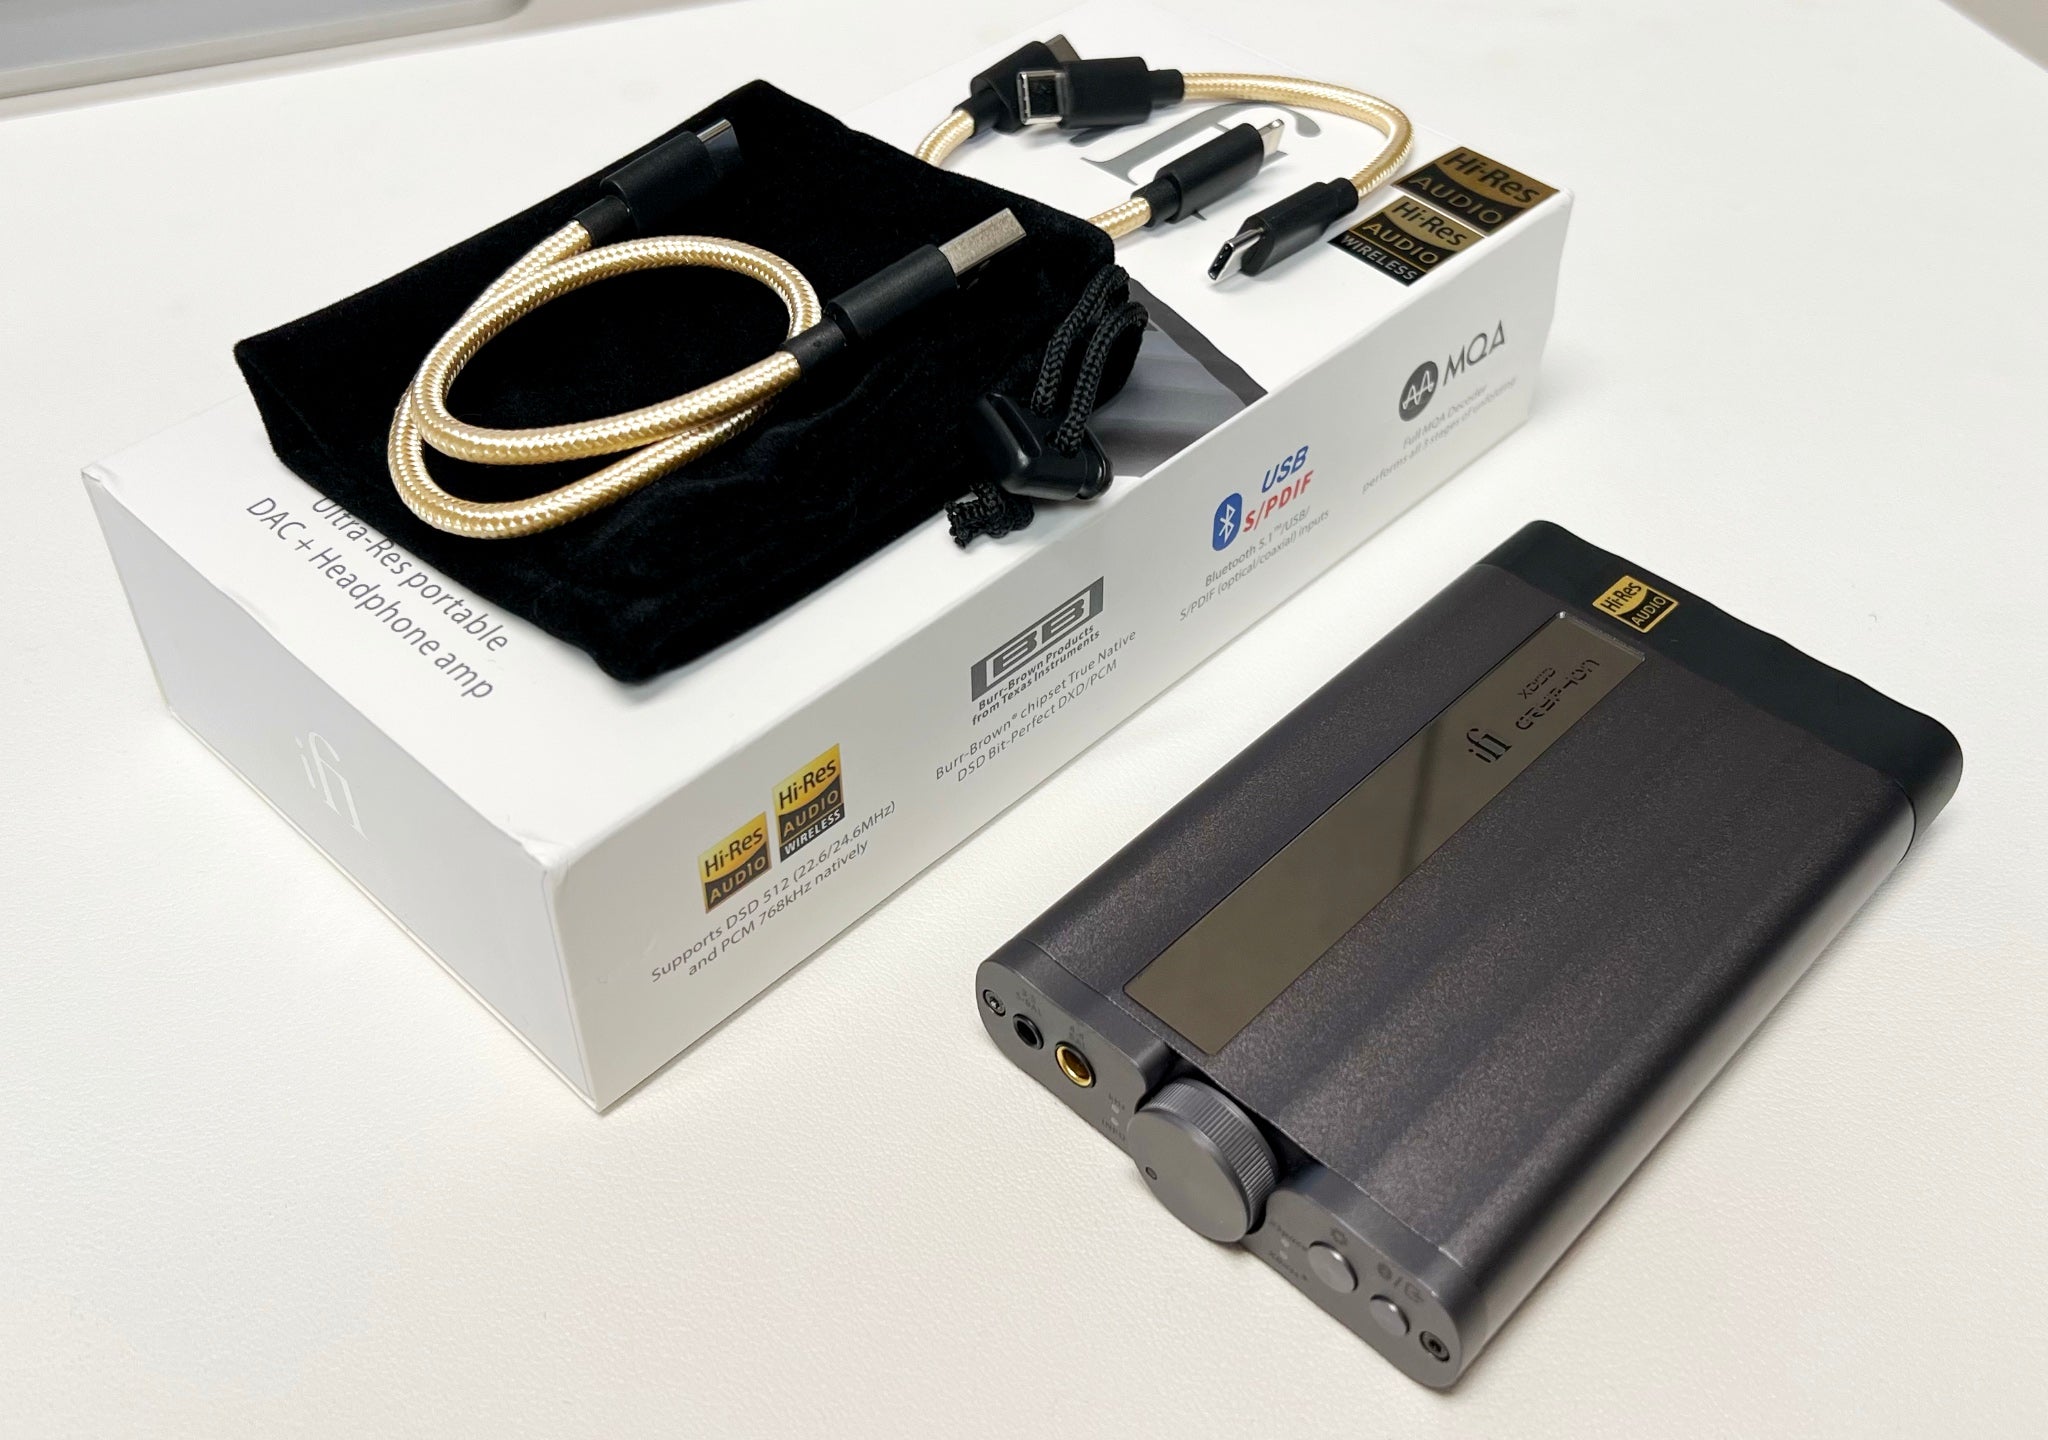 iFi Audio xDSD Gryphon with accessories and packaging